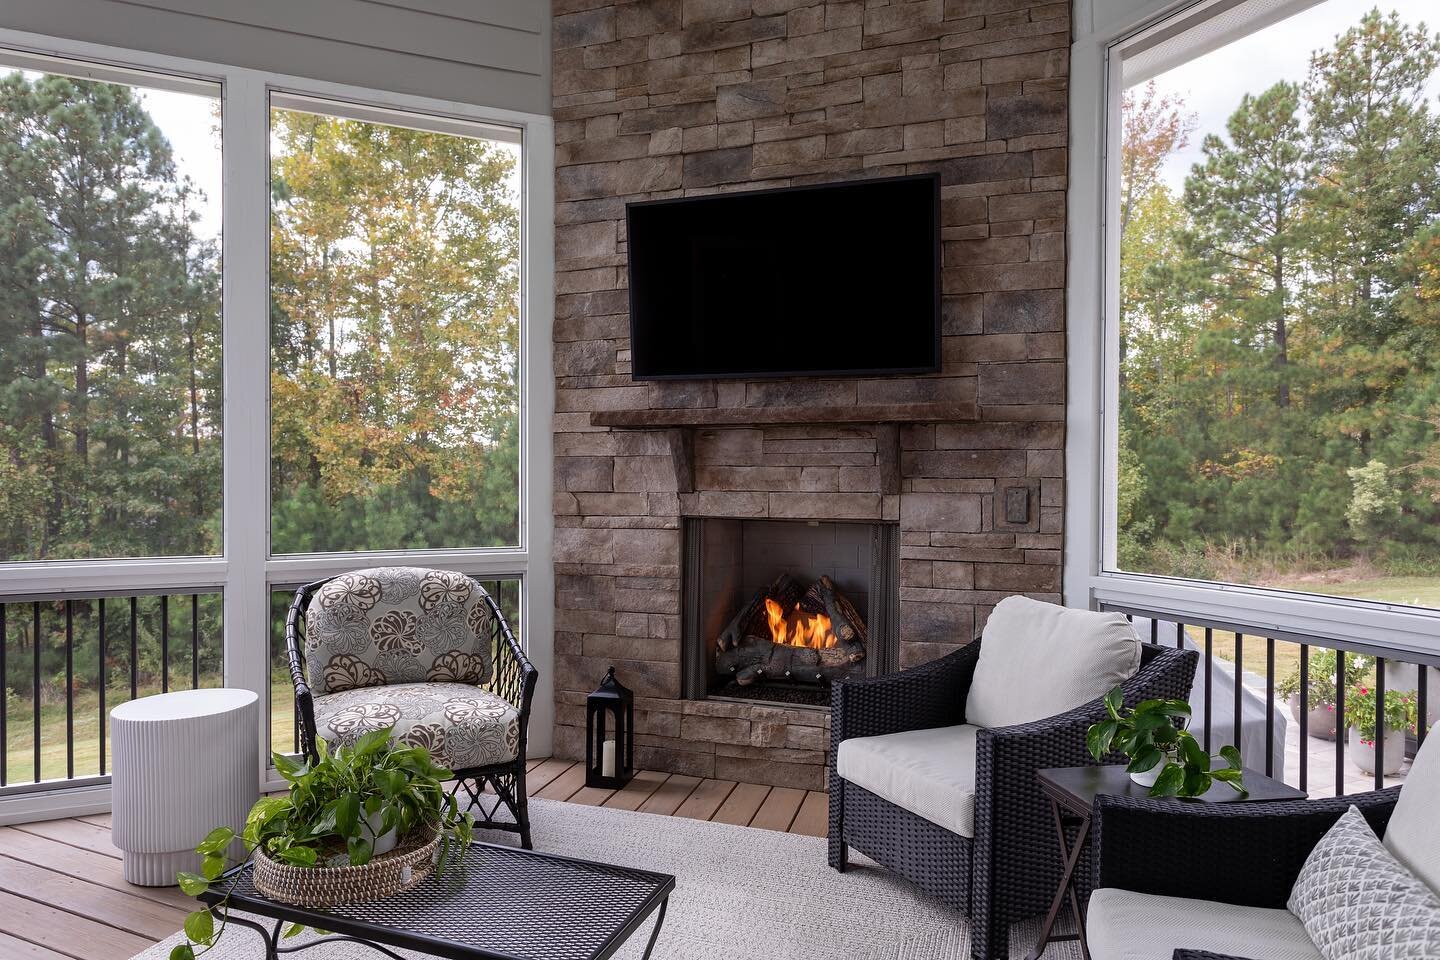 Weekend Goals: warming up and cuddling in front of this stunning porch fireplace! Check out the whole gallery (&ldquo;Mountain Views in Chapel Hill&rdquo;) on our portfolio page! It&rsquo;s a stunner, y&rsquo;all! 

#interiordesign #interiordesigner 